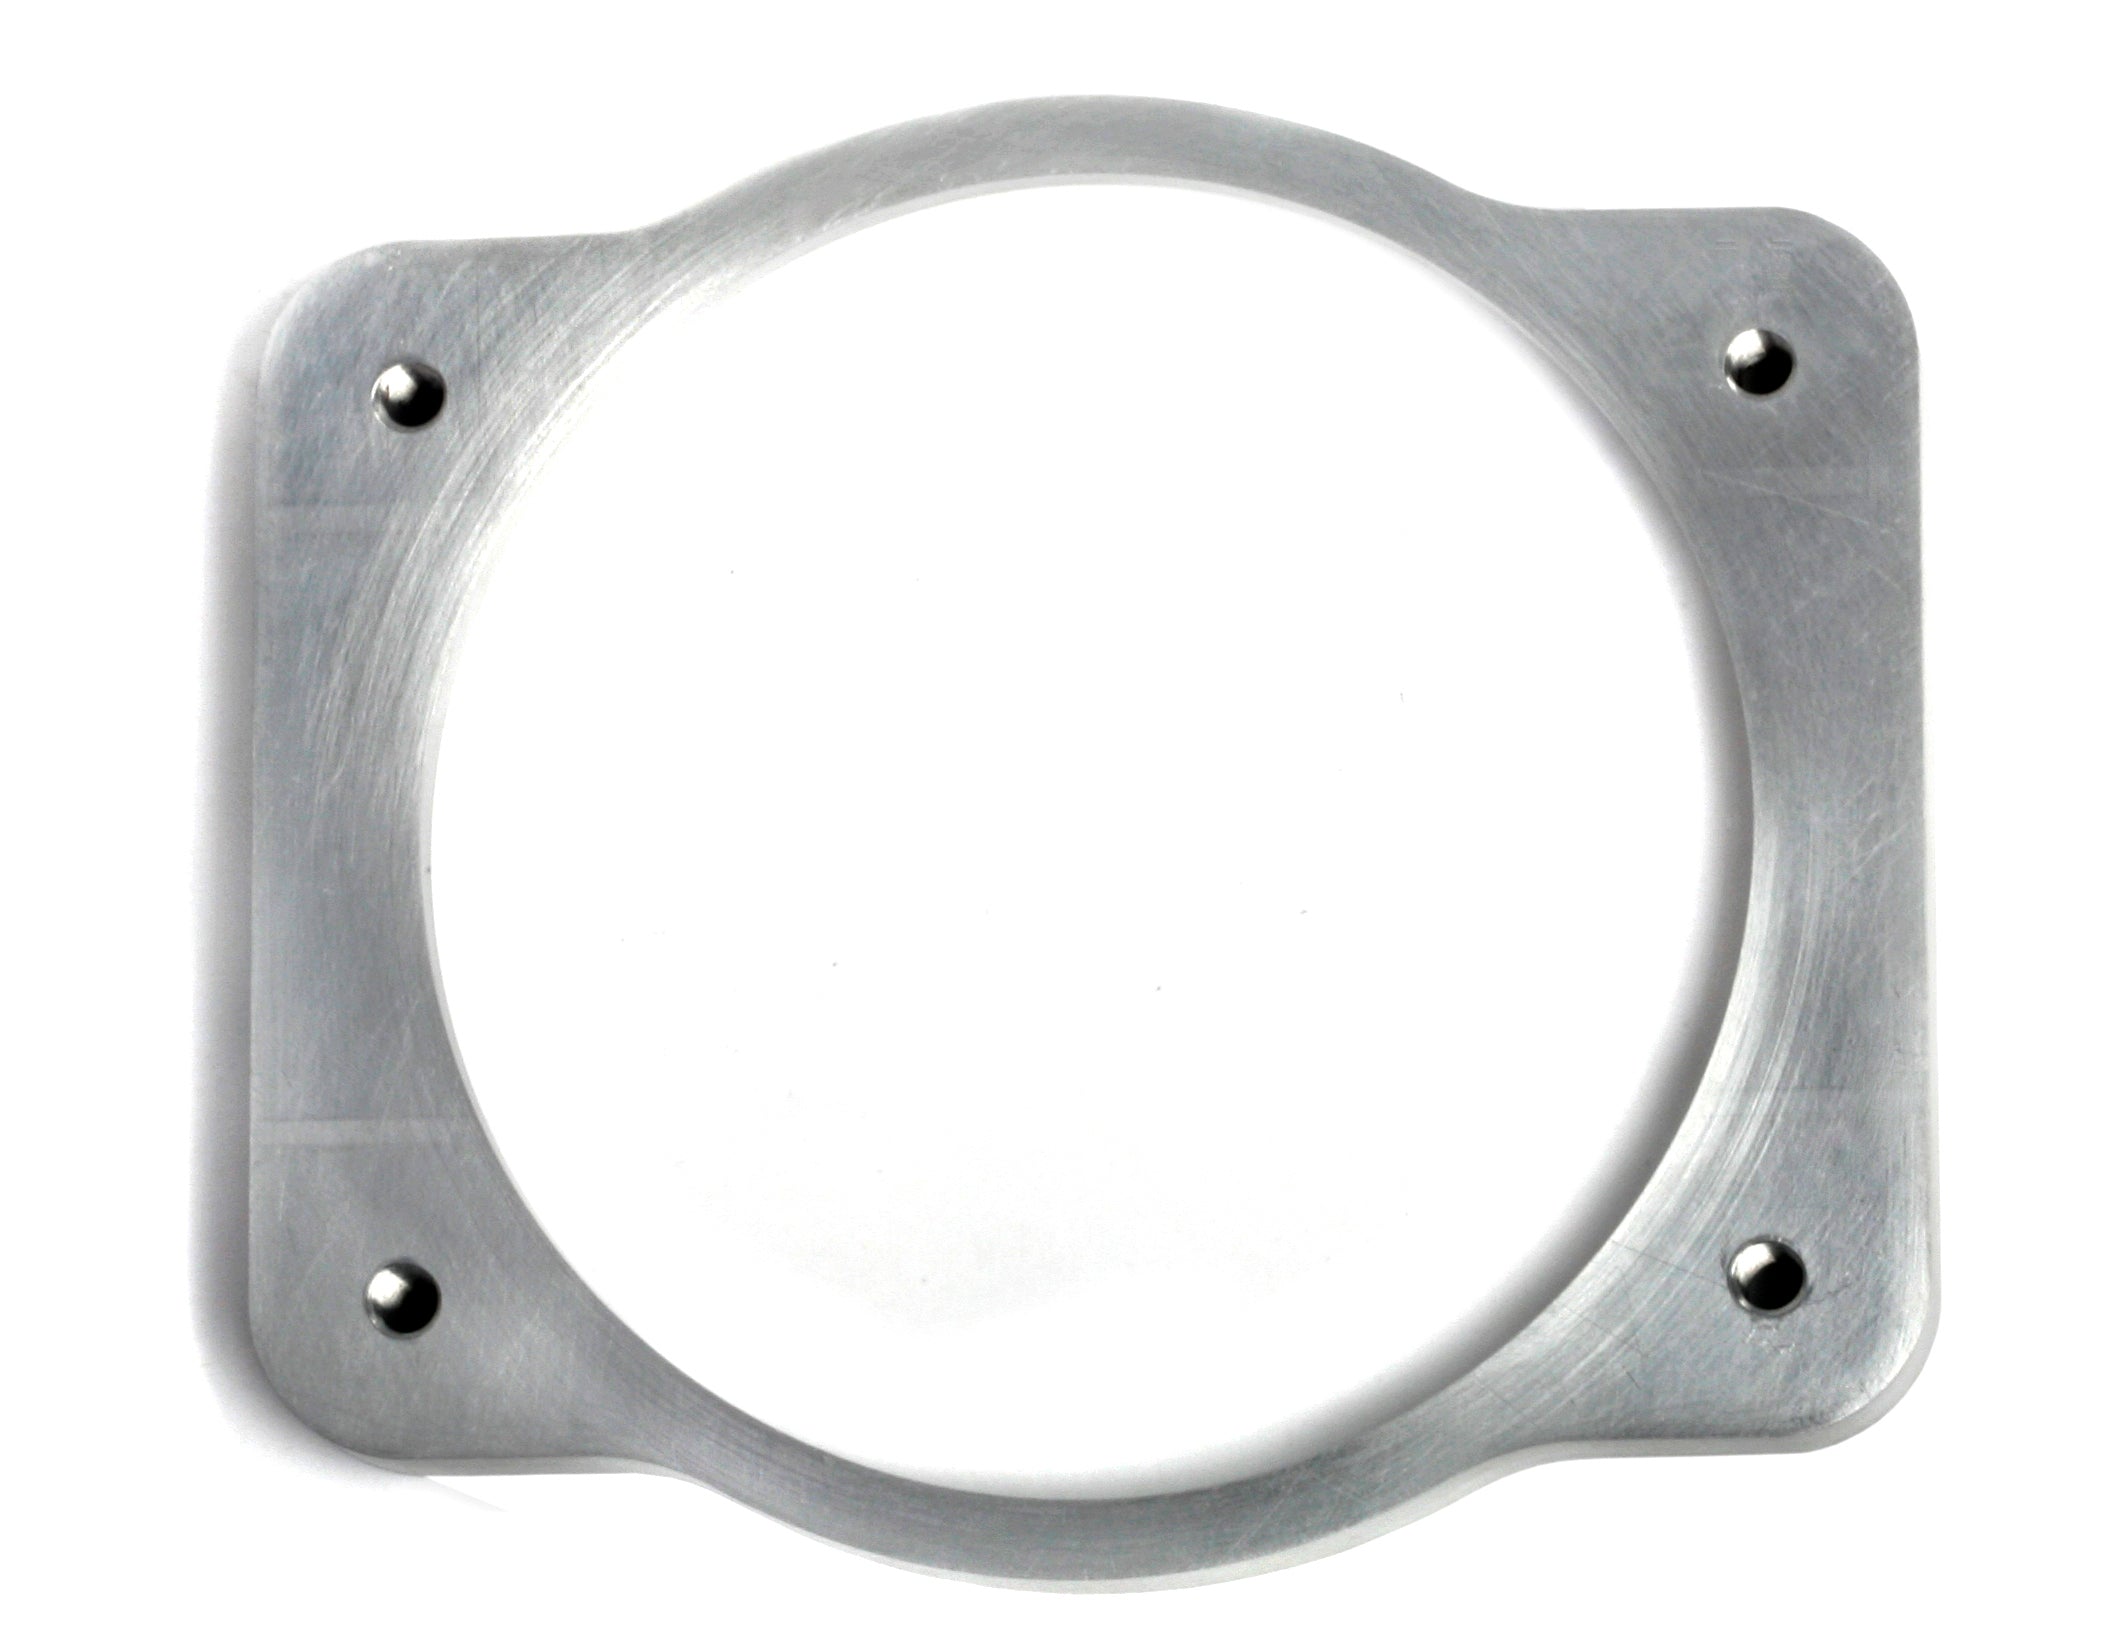 Holley EFI Fuel Injection Throttle Body Flange 300-222